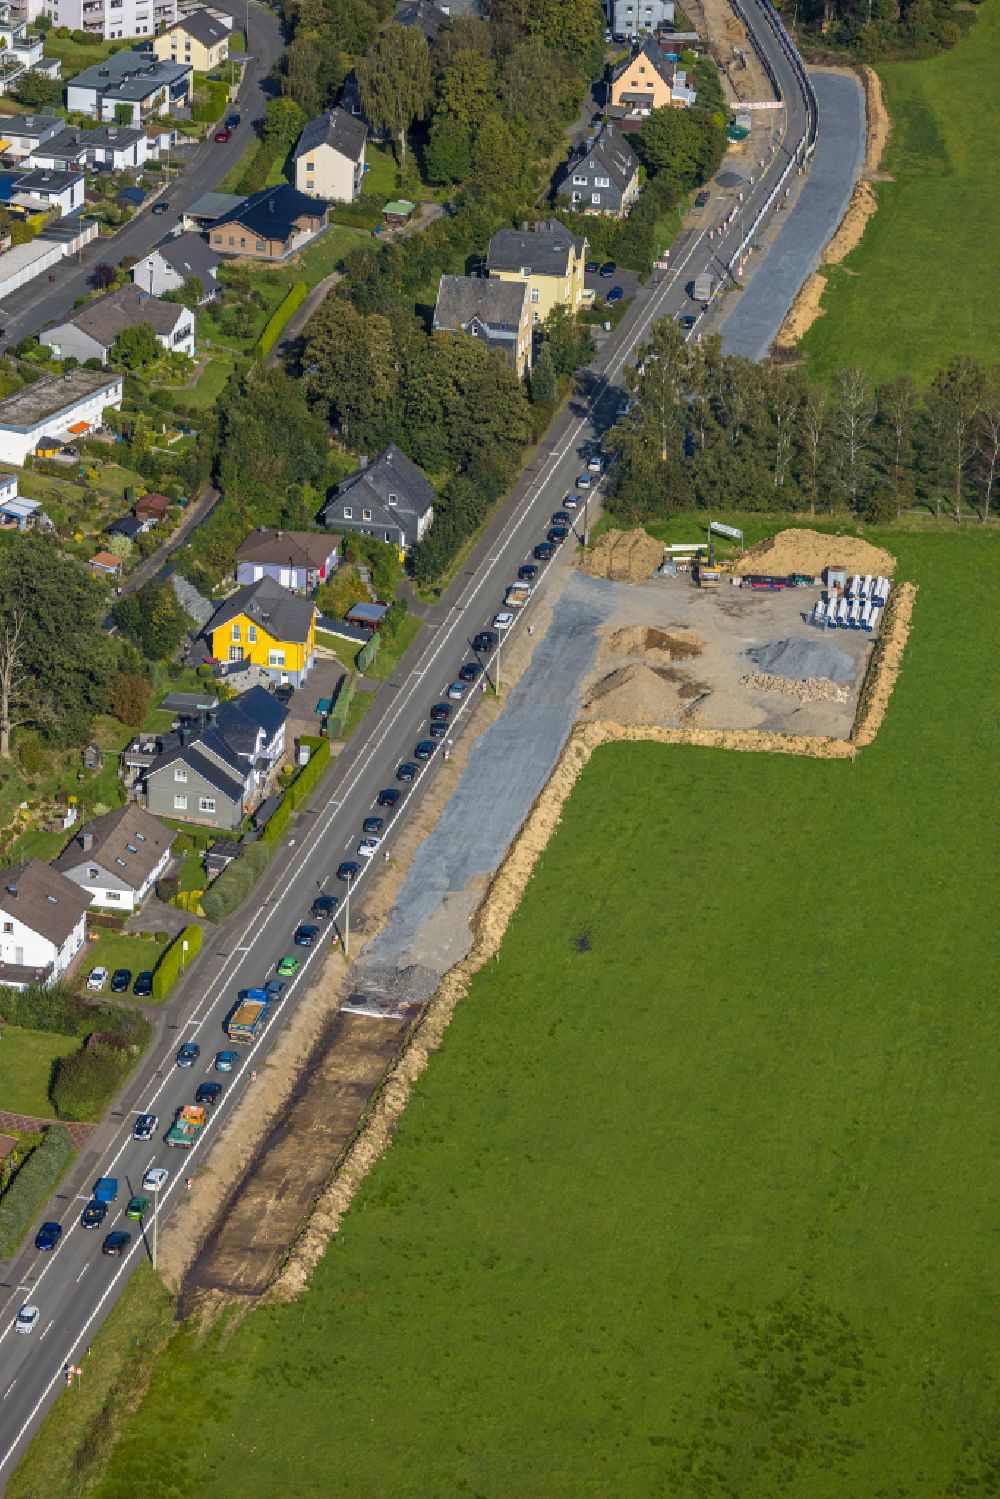 Aerial photograph Allenbach - Construction site for the new building of the road Der Bundesstrasse 508 on street Wittgensteiner Strasse in Allenbach at Siegerland in the state North Rhine-Westphalia, Germany